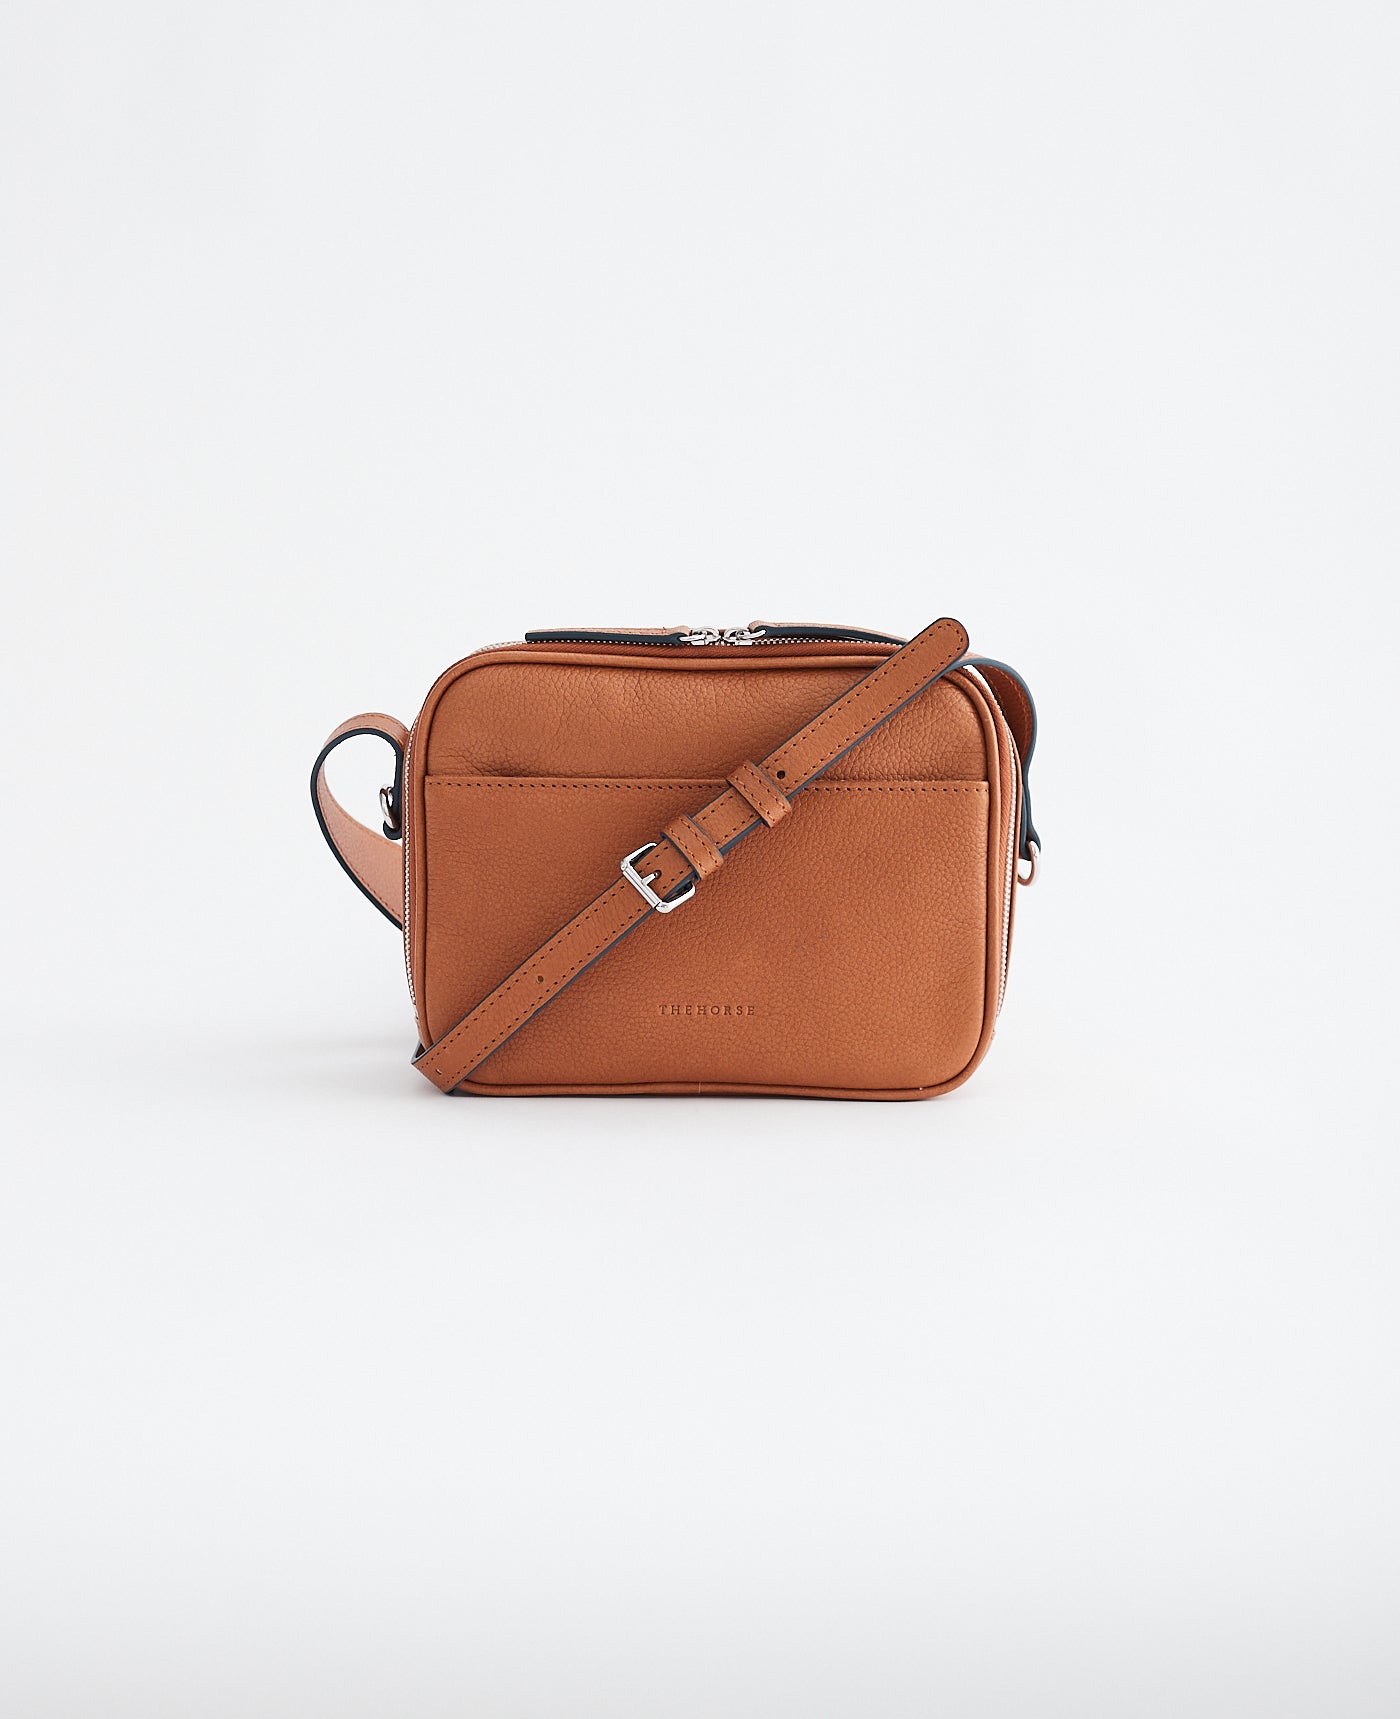 Dylan Leather Double Zip Cross Body Bag in Tan Leather by The Horse®